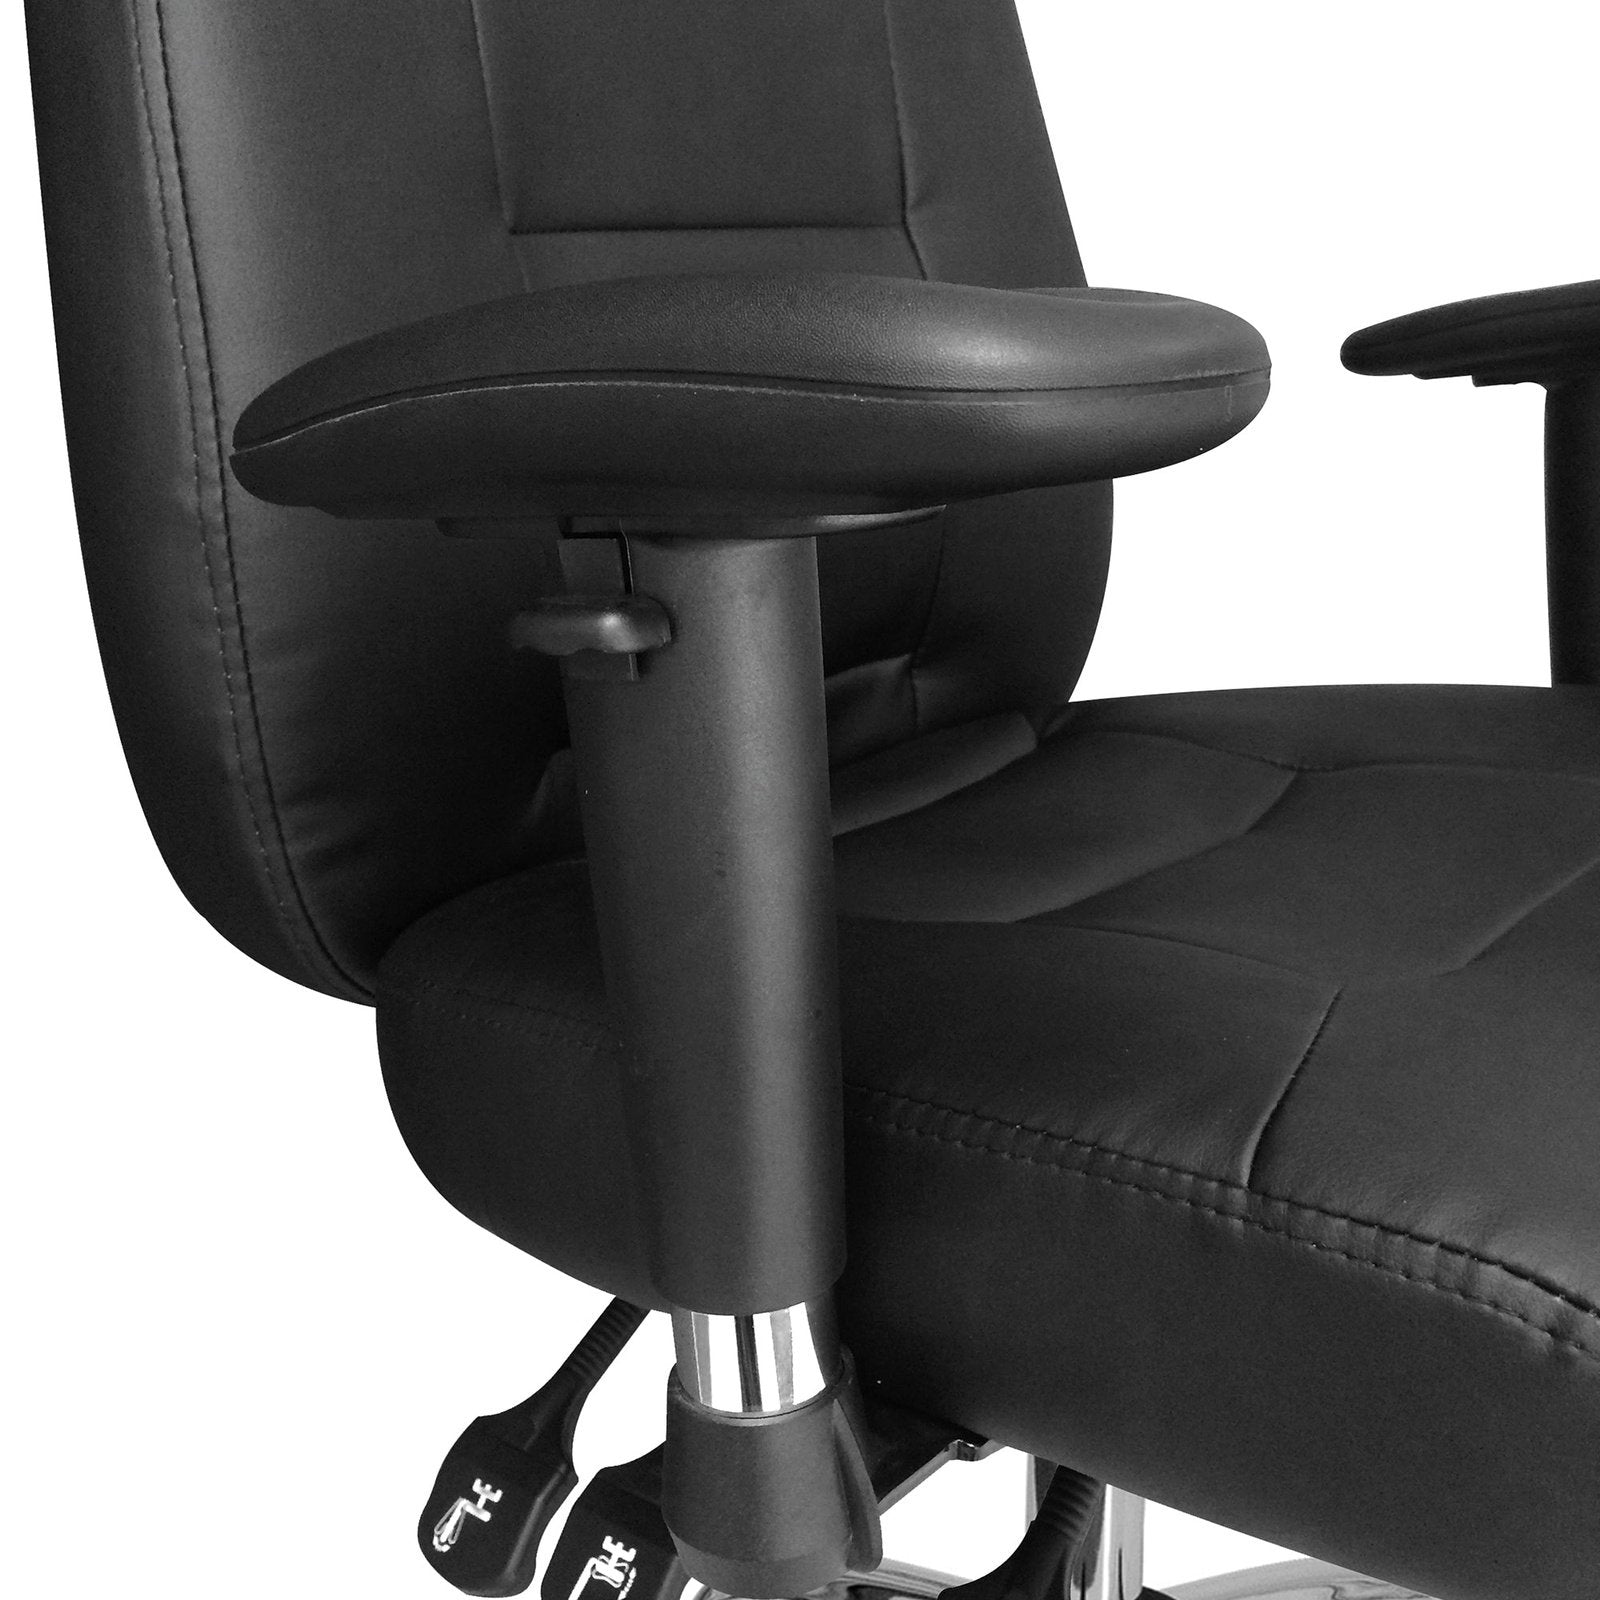 24 Hour Synchronous Operator Chair with Bonded Leather Upholstery and Chrome Base - Office Products Online